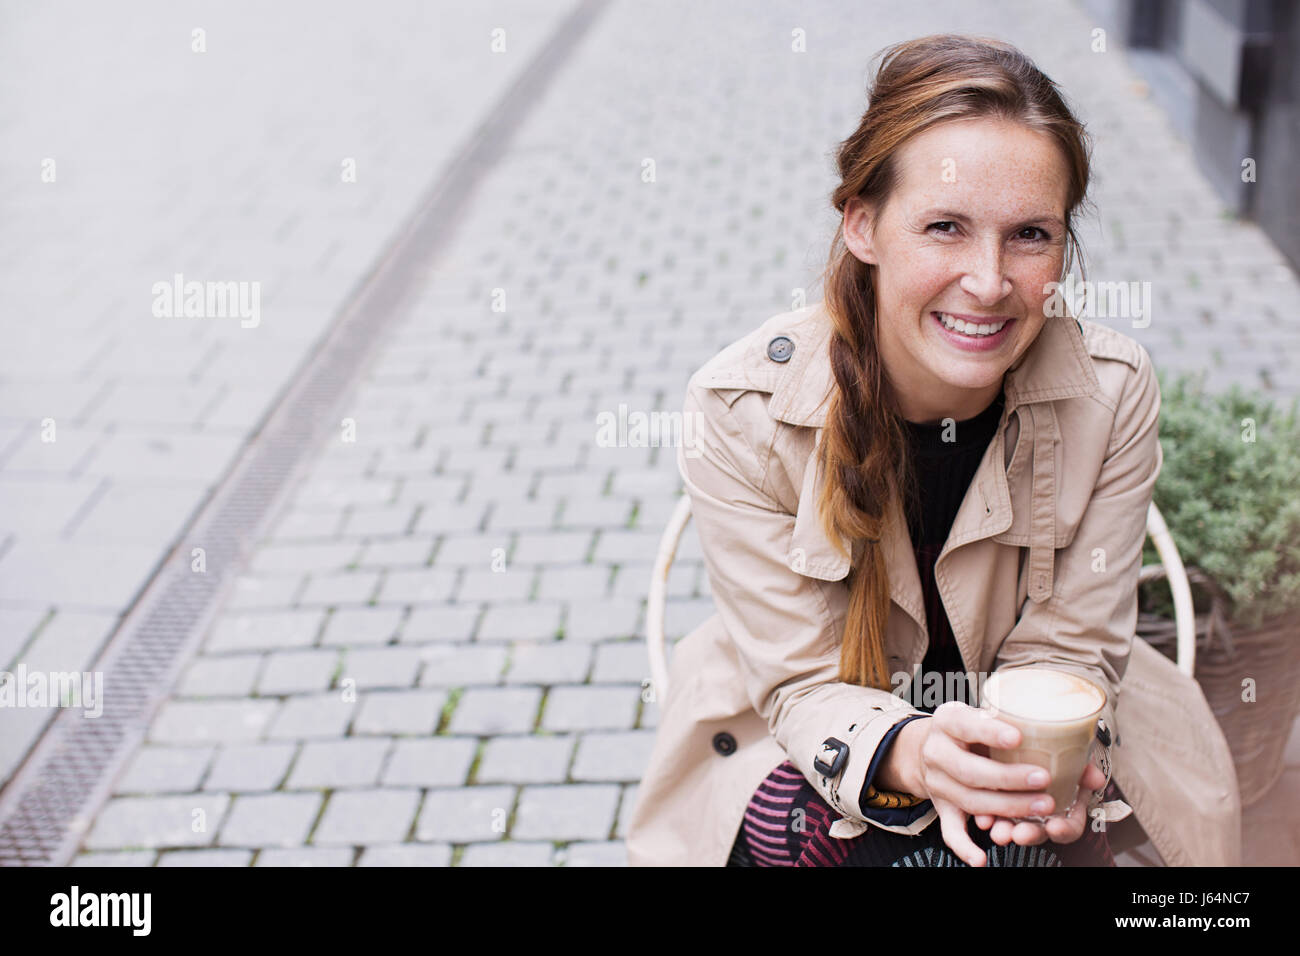 Portrait smiling woman drinking iced coffee at sidewalk cafe Stock Photo